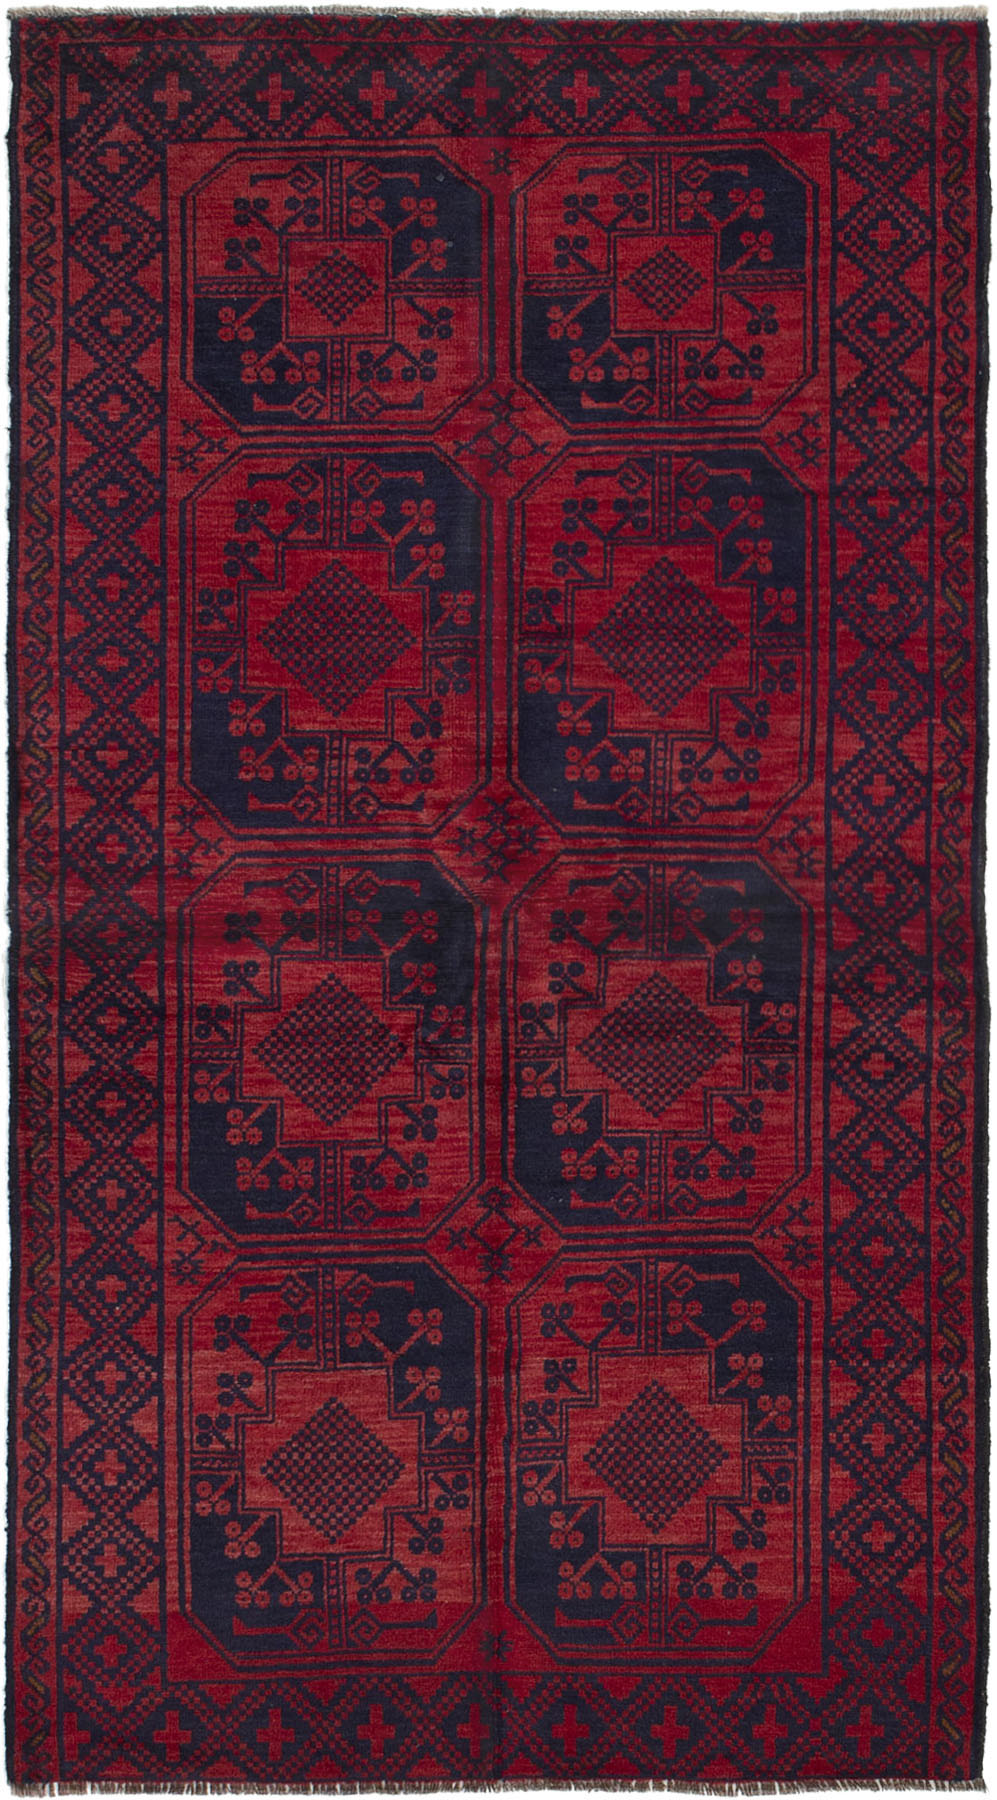 Hand-knotted Teimani Light Red Wool Rug 3'6" x 6'8" Size: 3'6" x 6'8"  